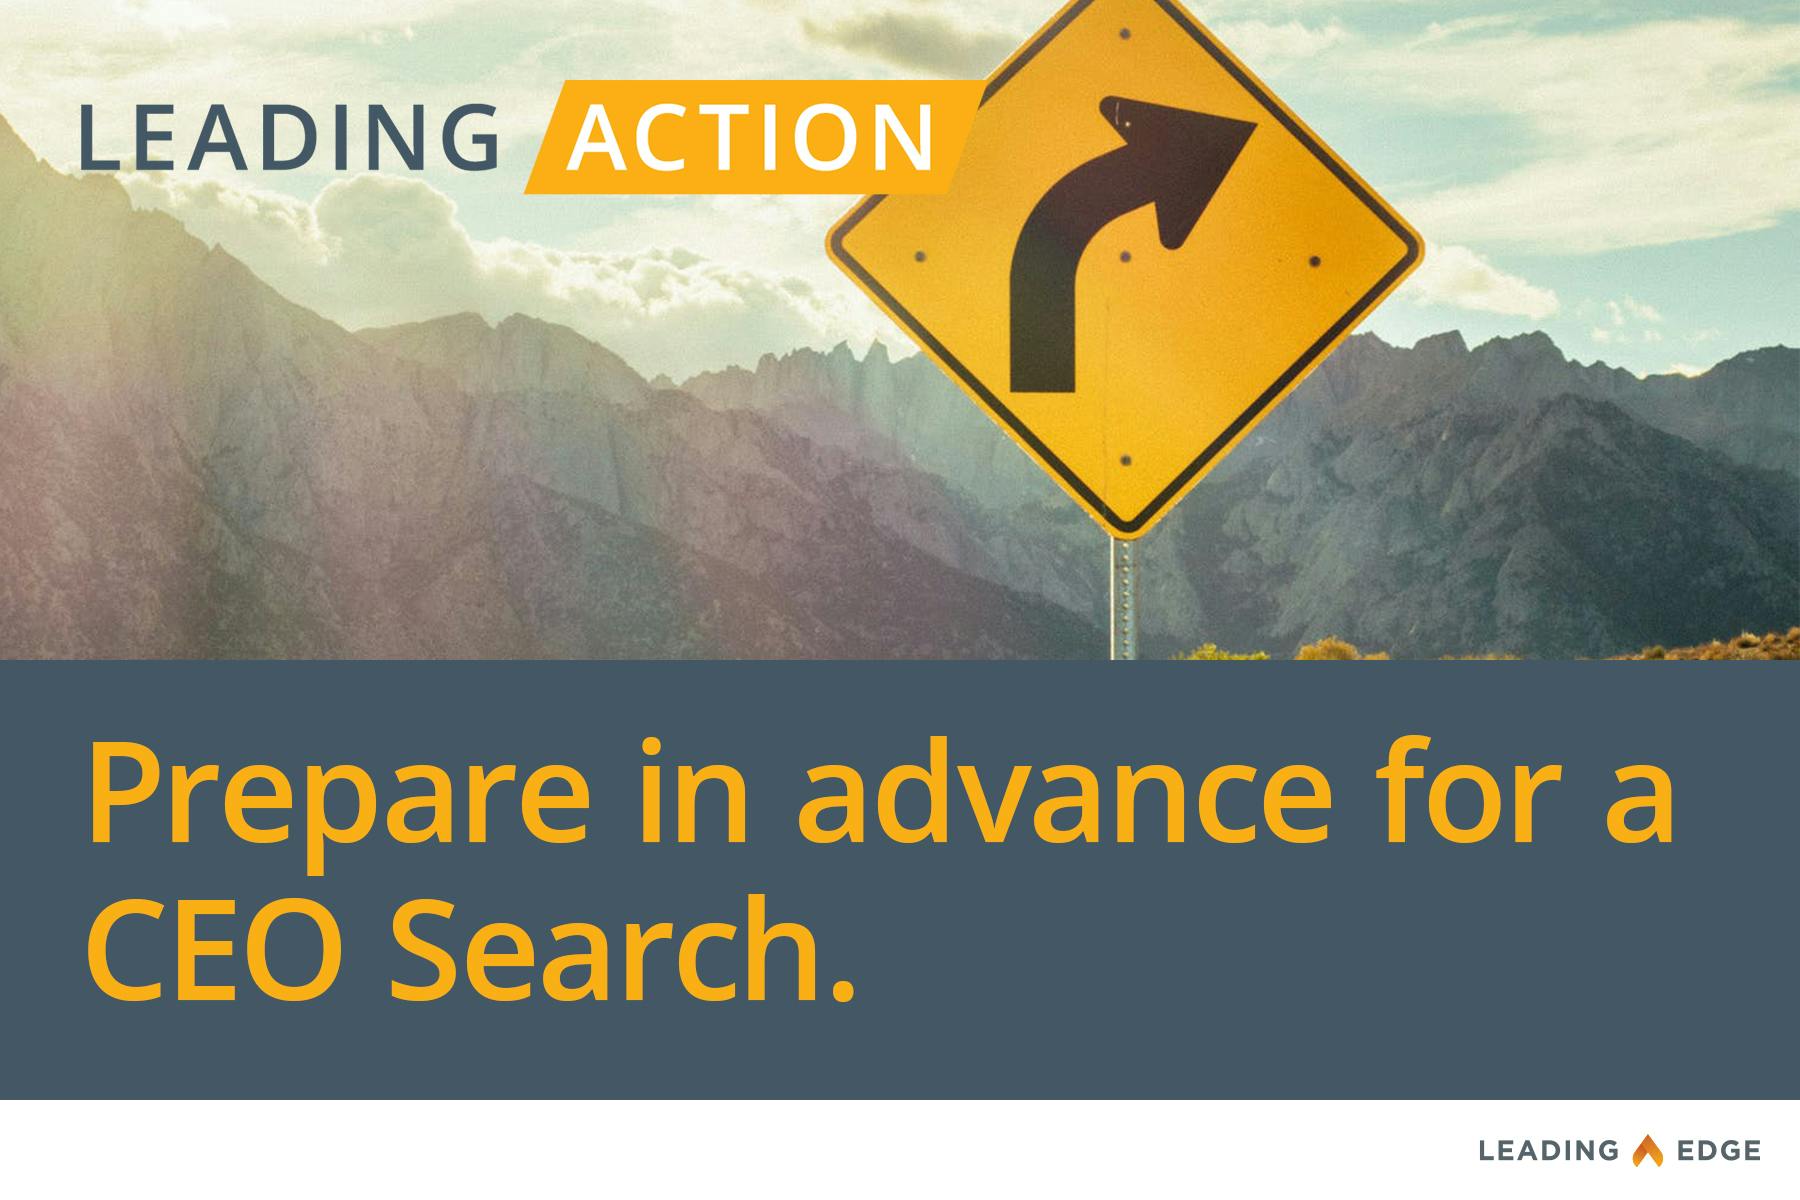 Leading Action: Prepare in advance for a CEO Search.